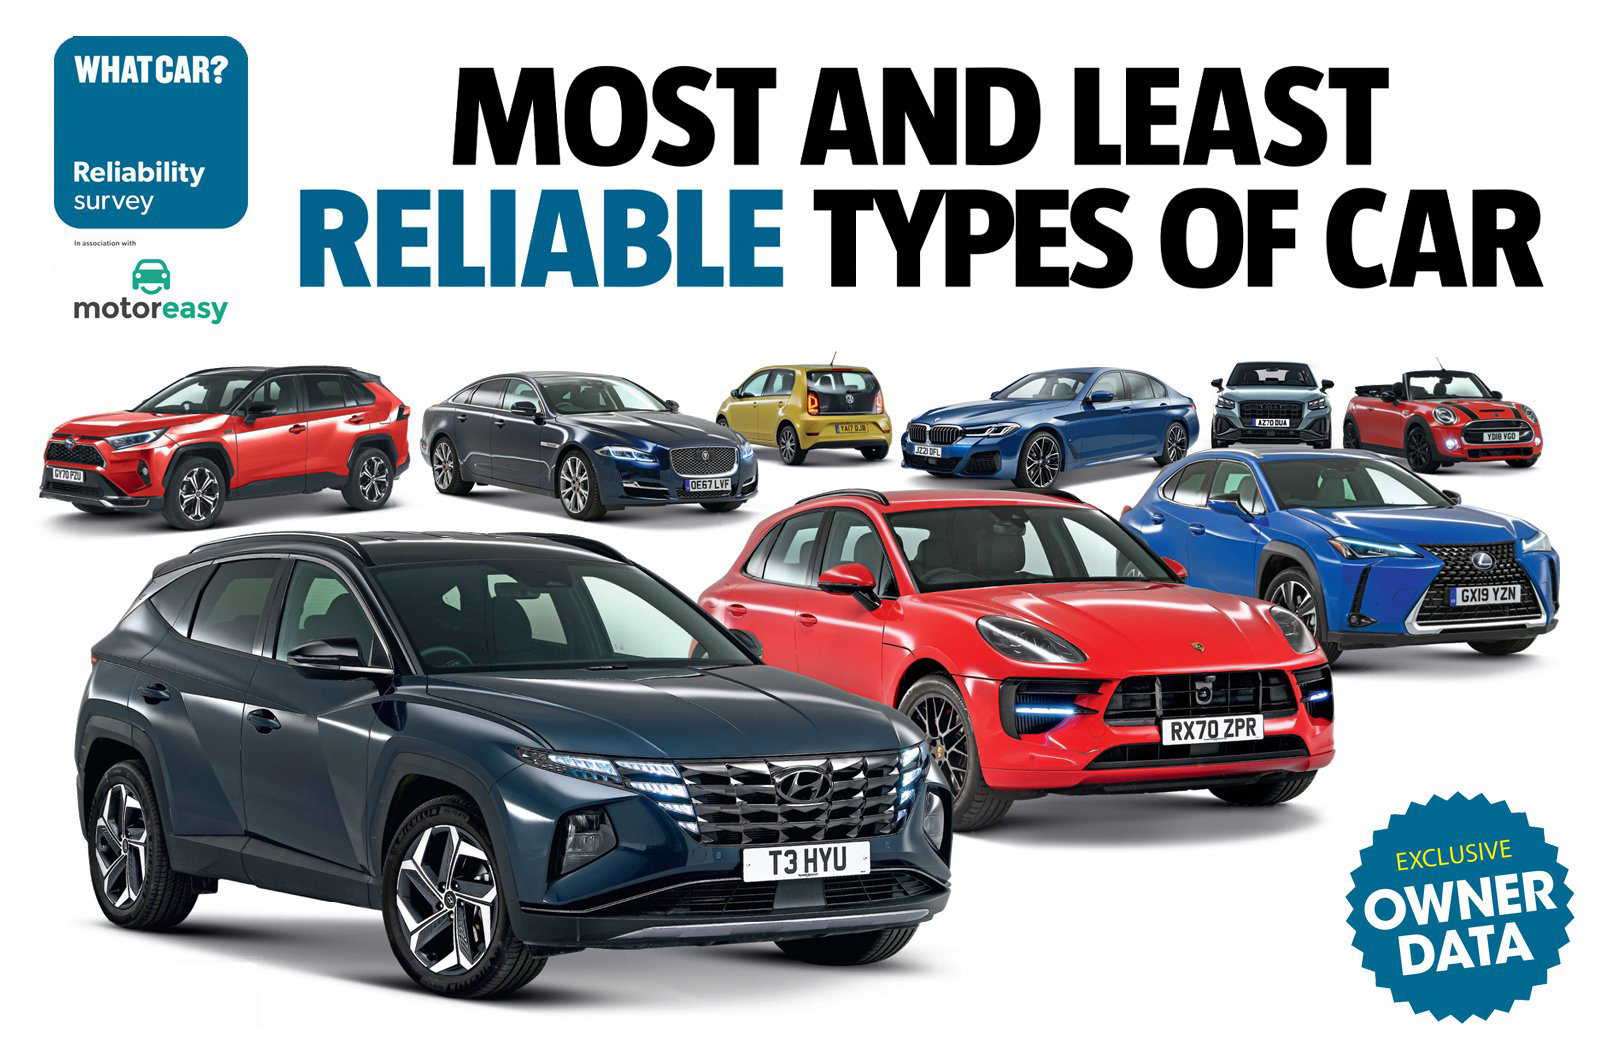 Most and least reliable types of car